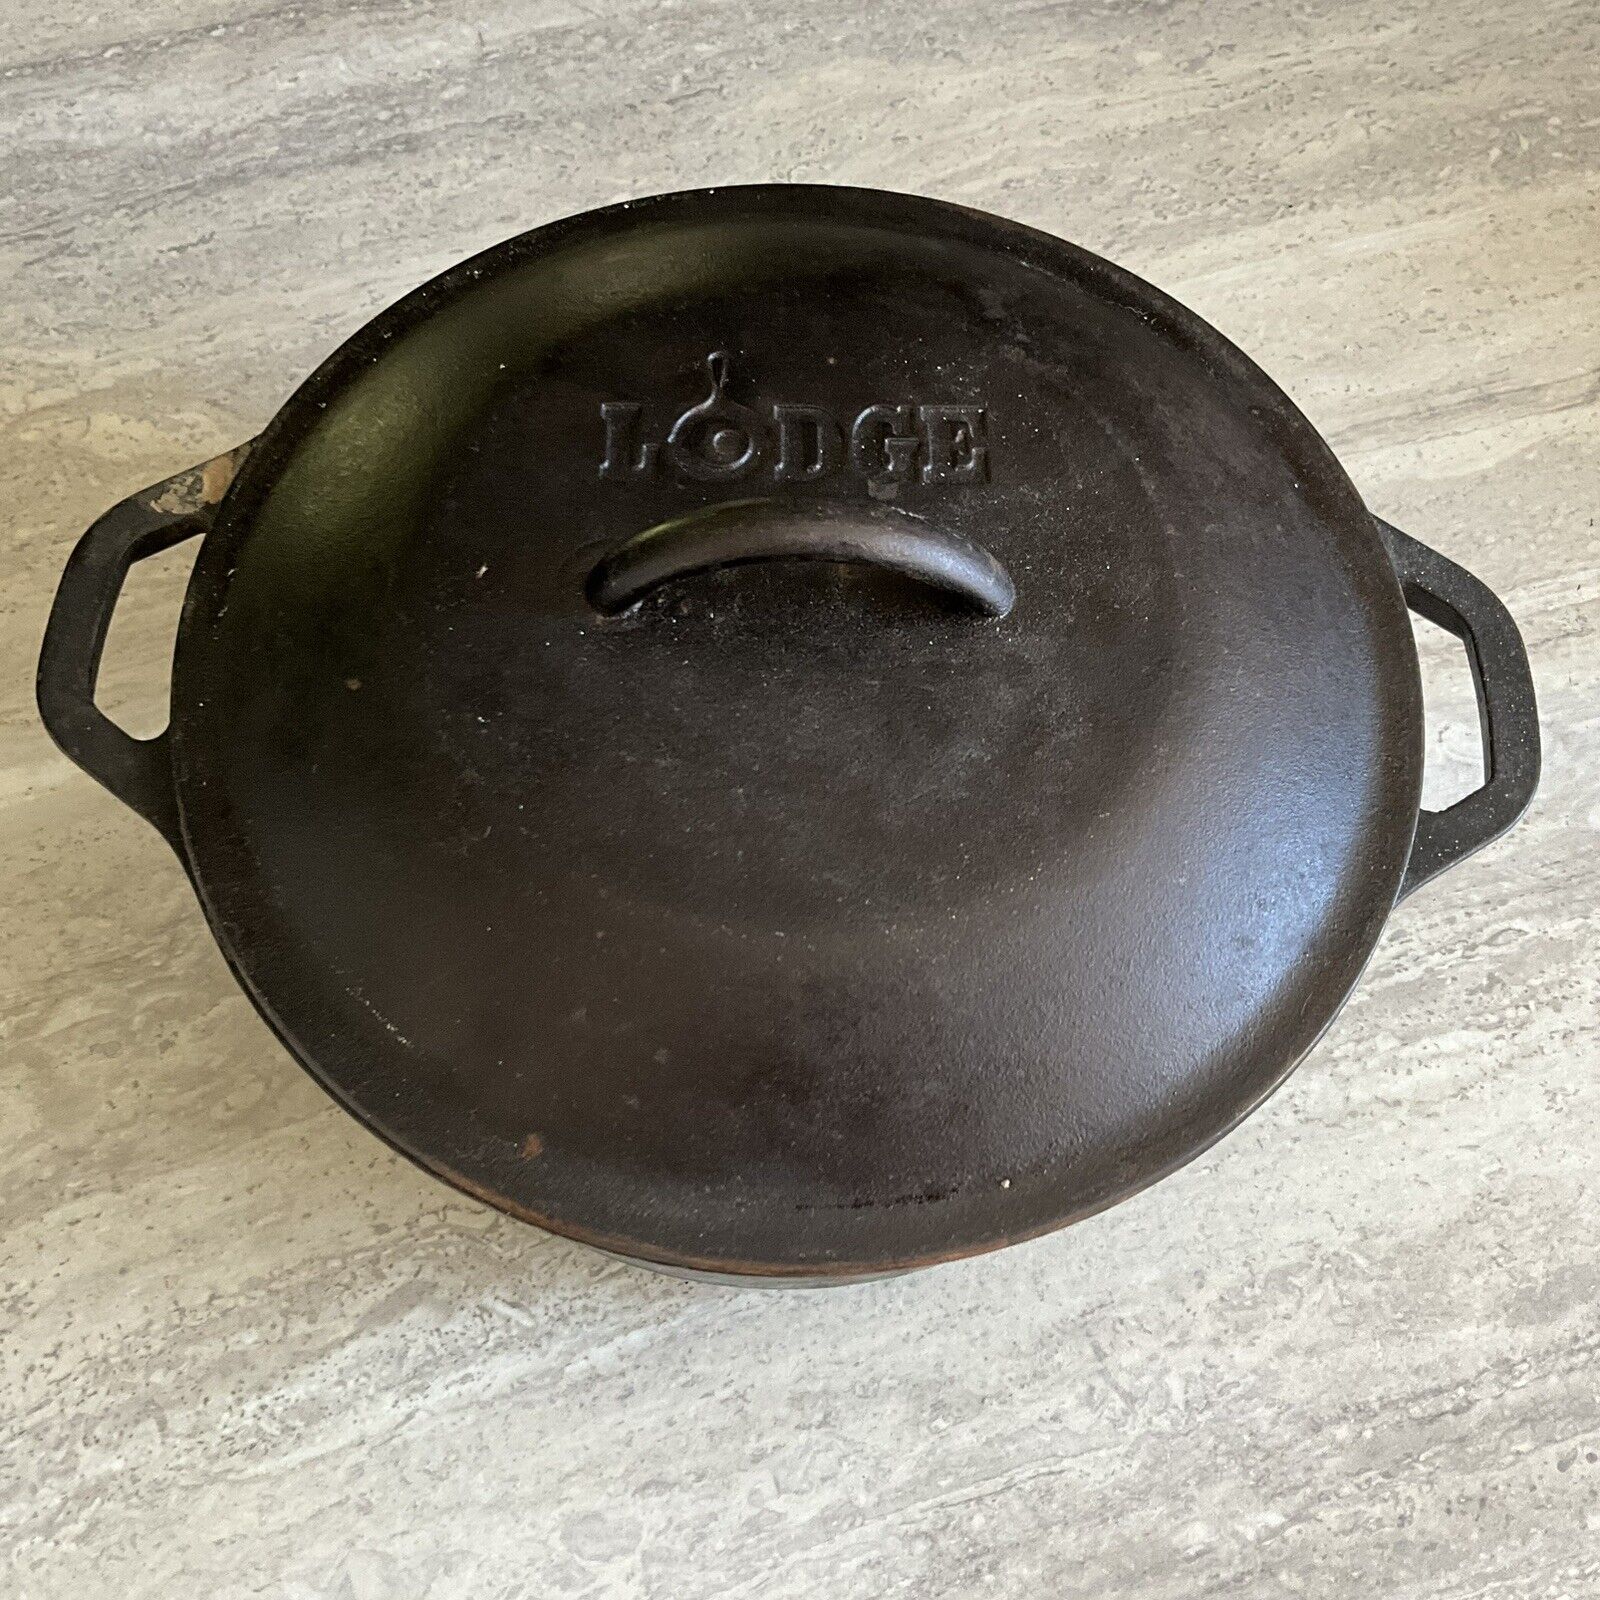 Vintage Old Lodge 10 1/4 8DOL USA Cast Iron Dutch Oven Pot #8 With Lid